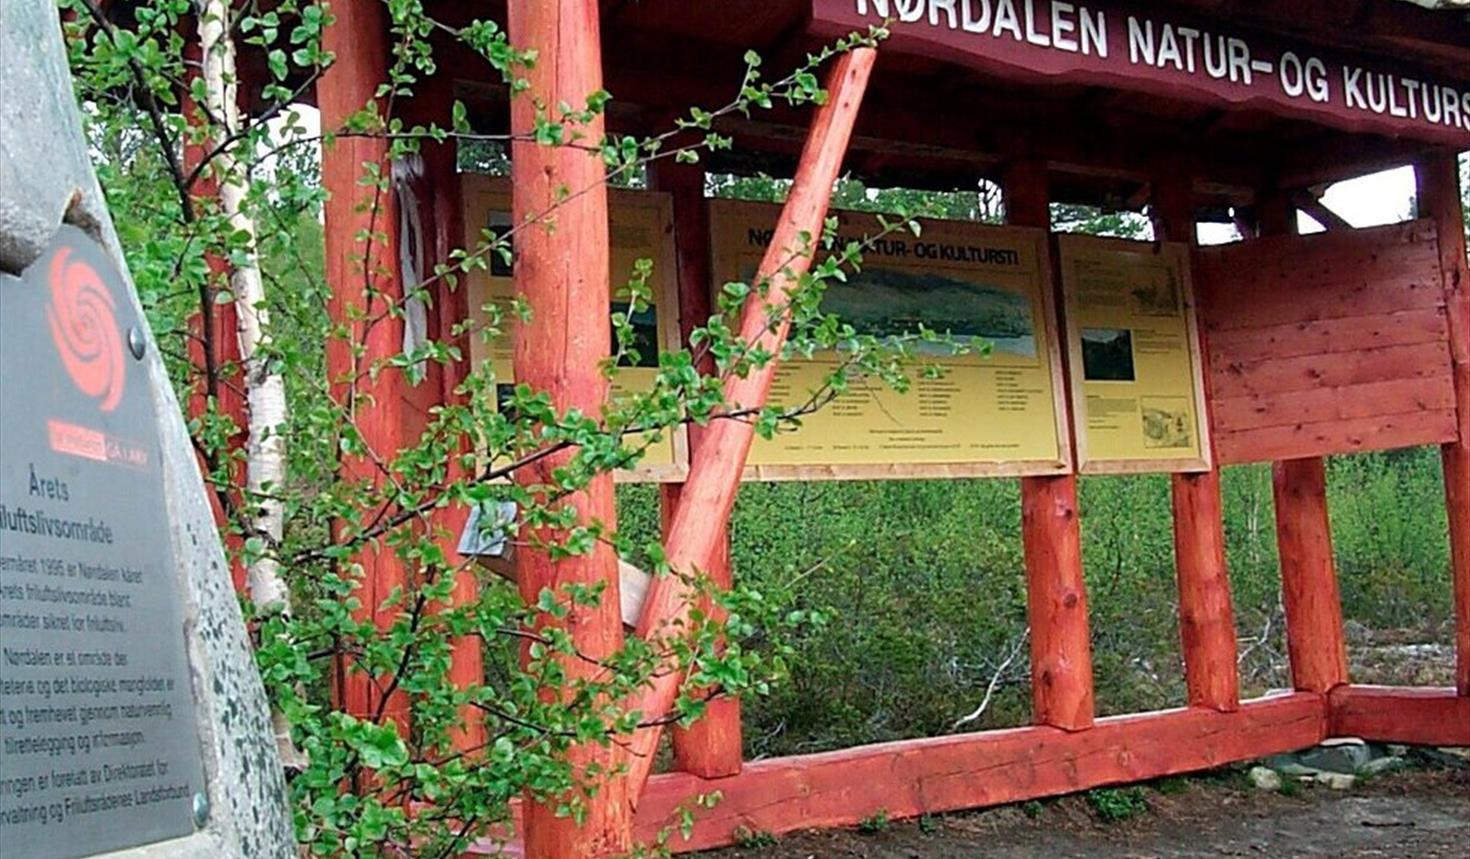 Nørdalen nature and culture trail